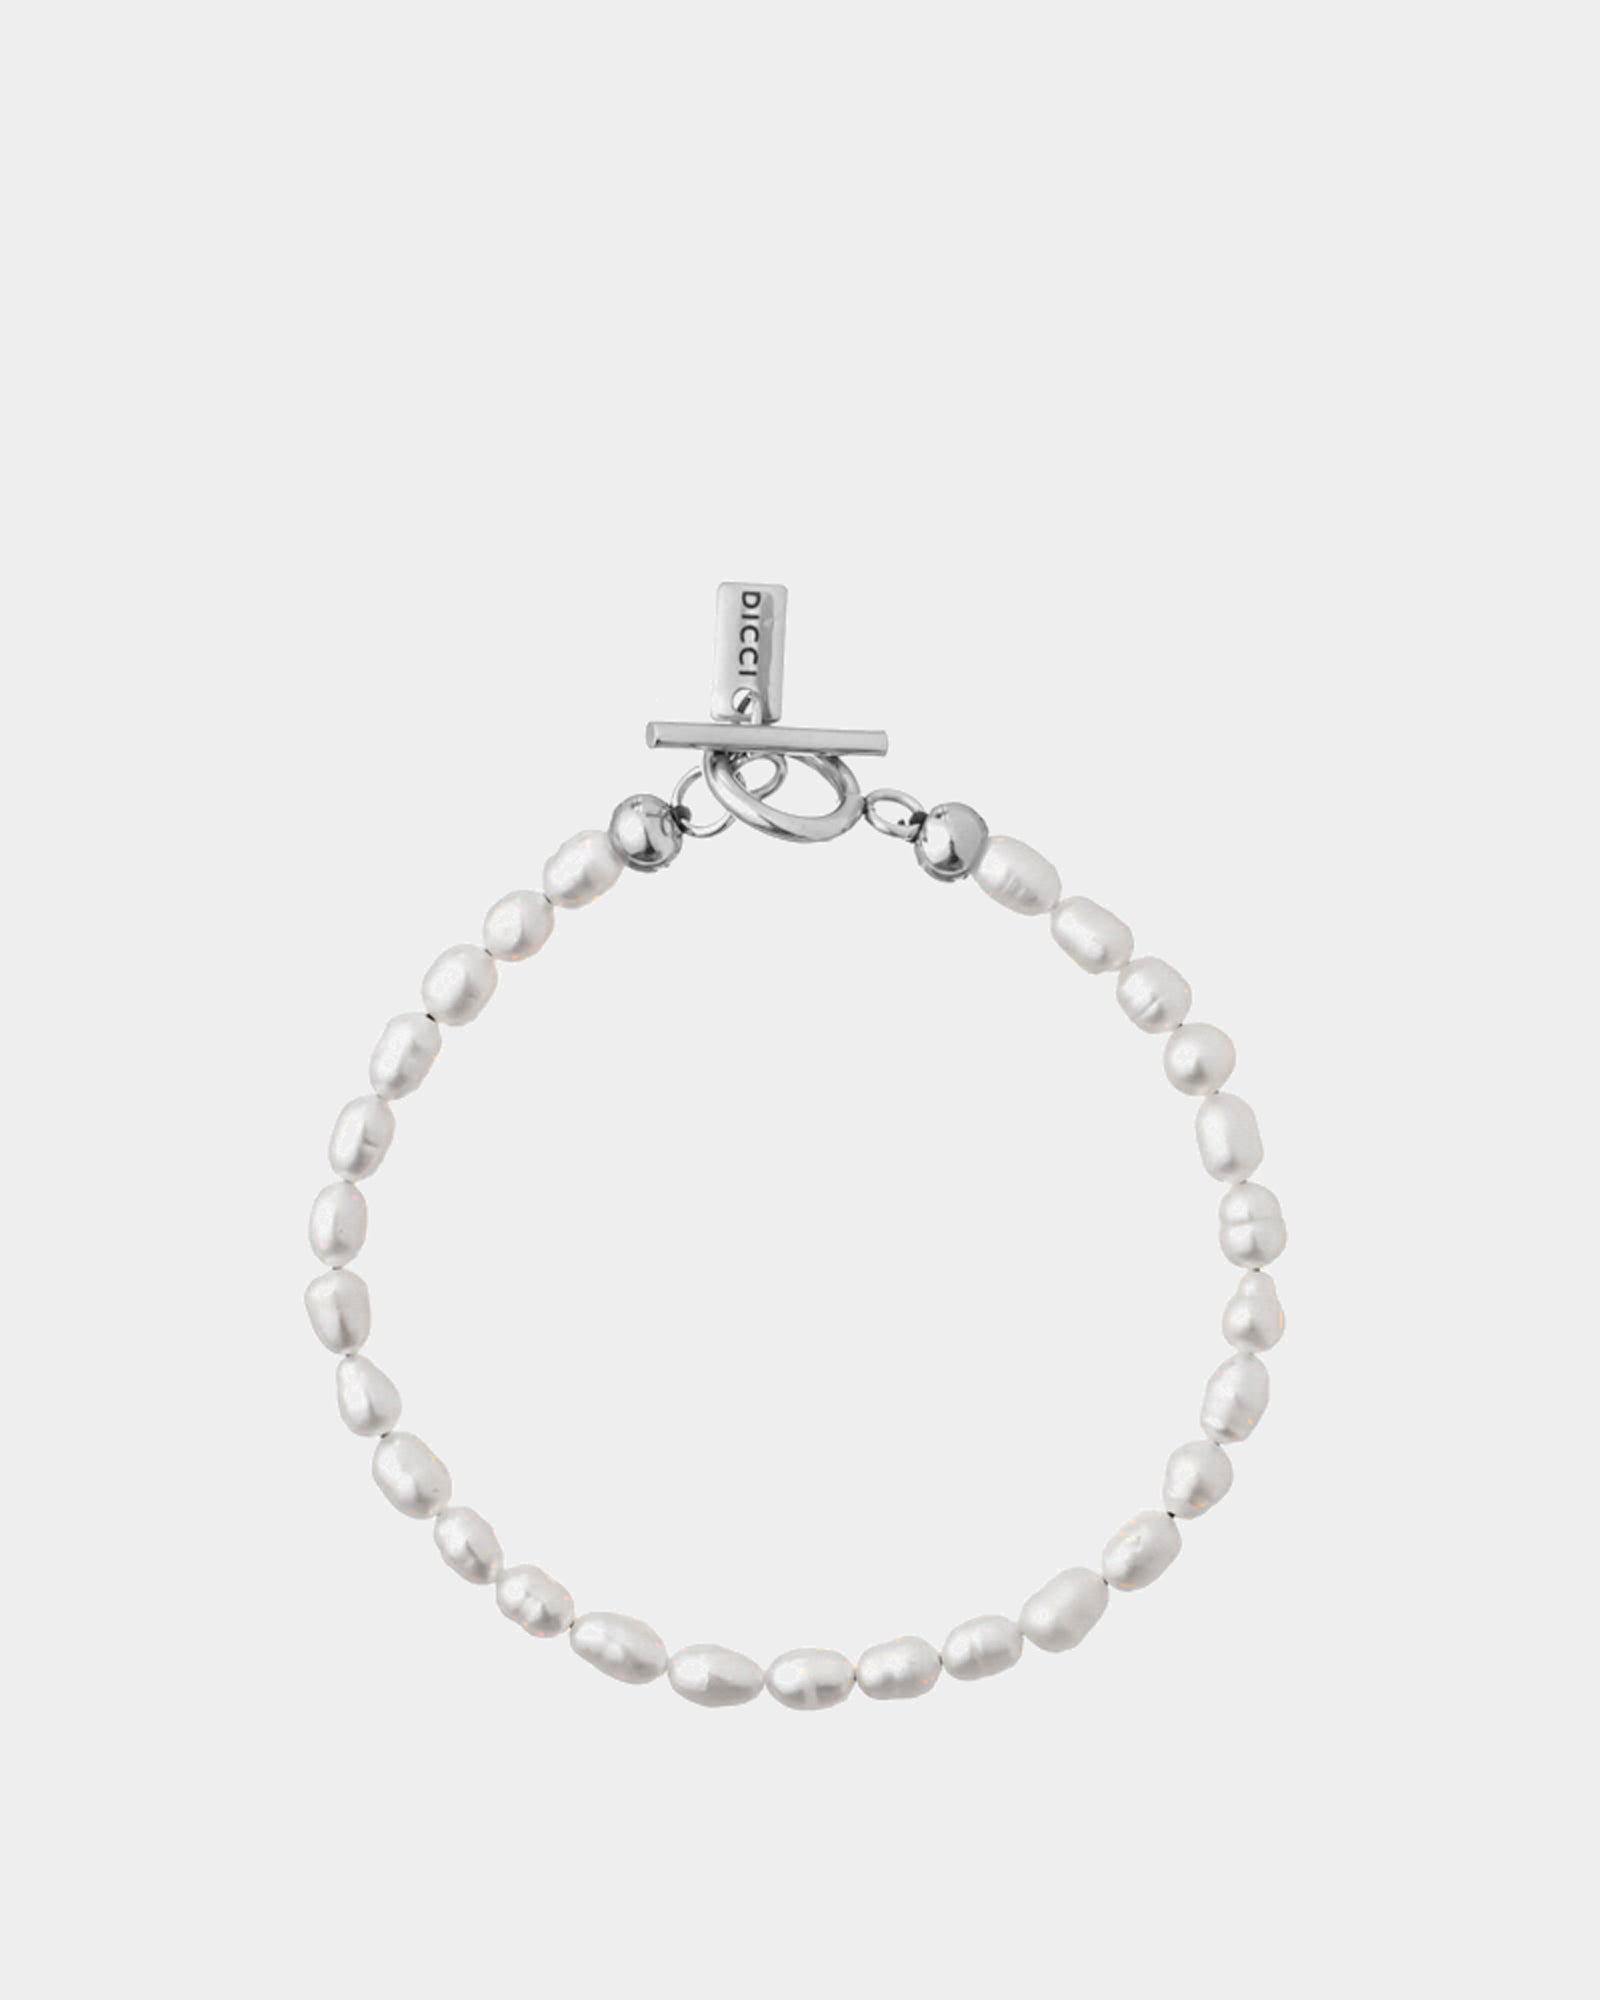 Pearl bead bracelet Dicci - Secure clasp in 316L stainless steel - Online unissex Jewelry - Dicci